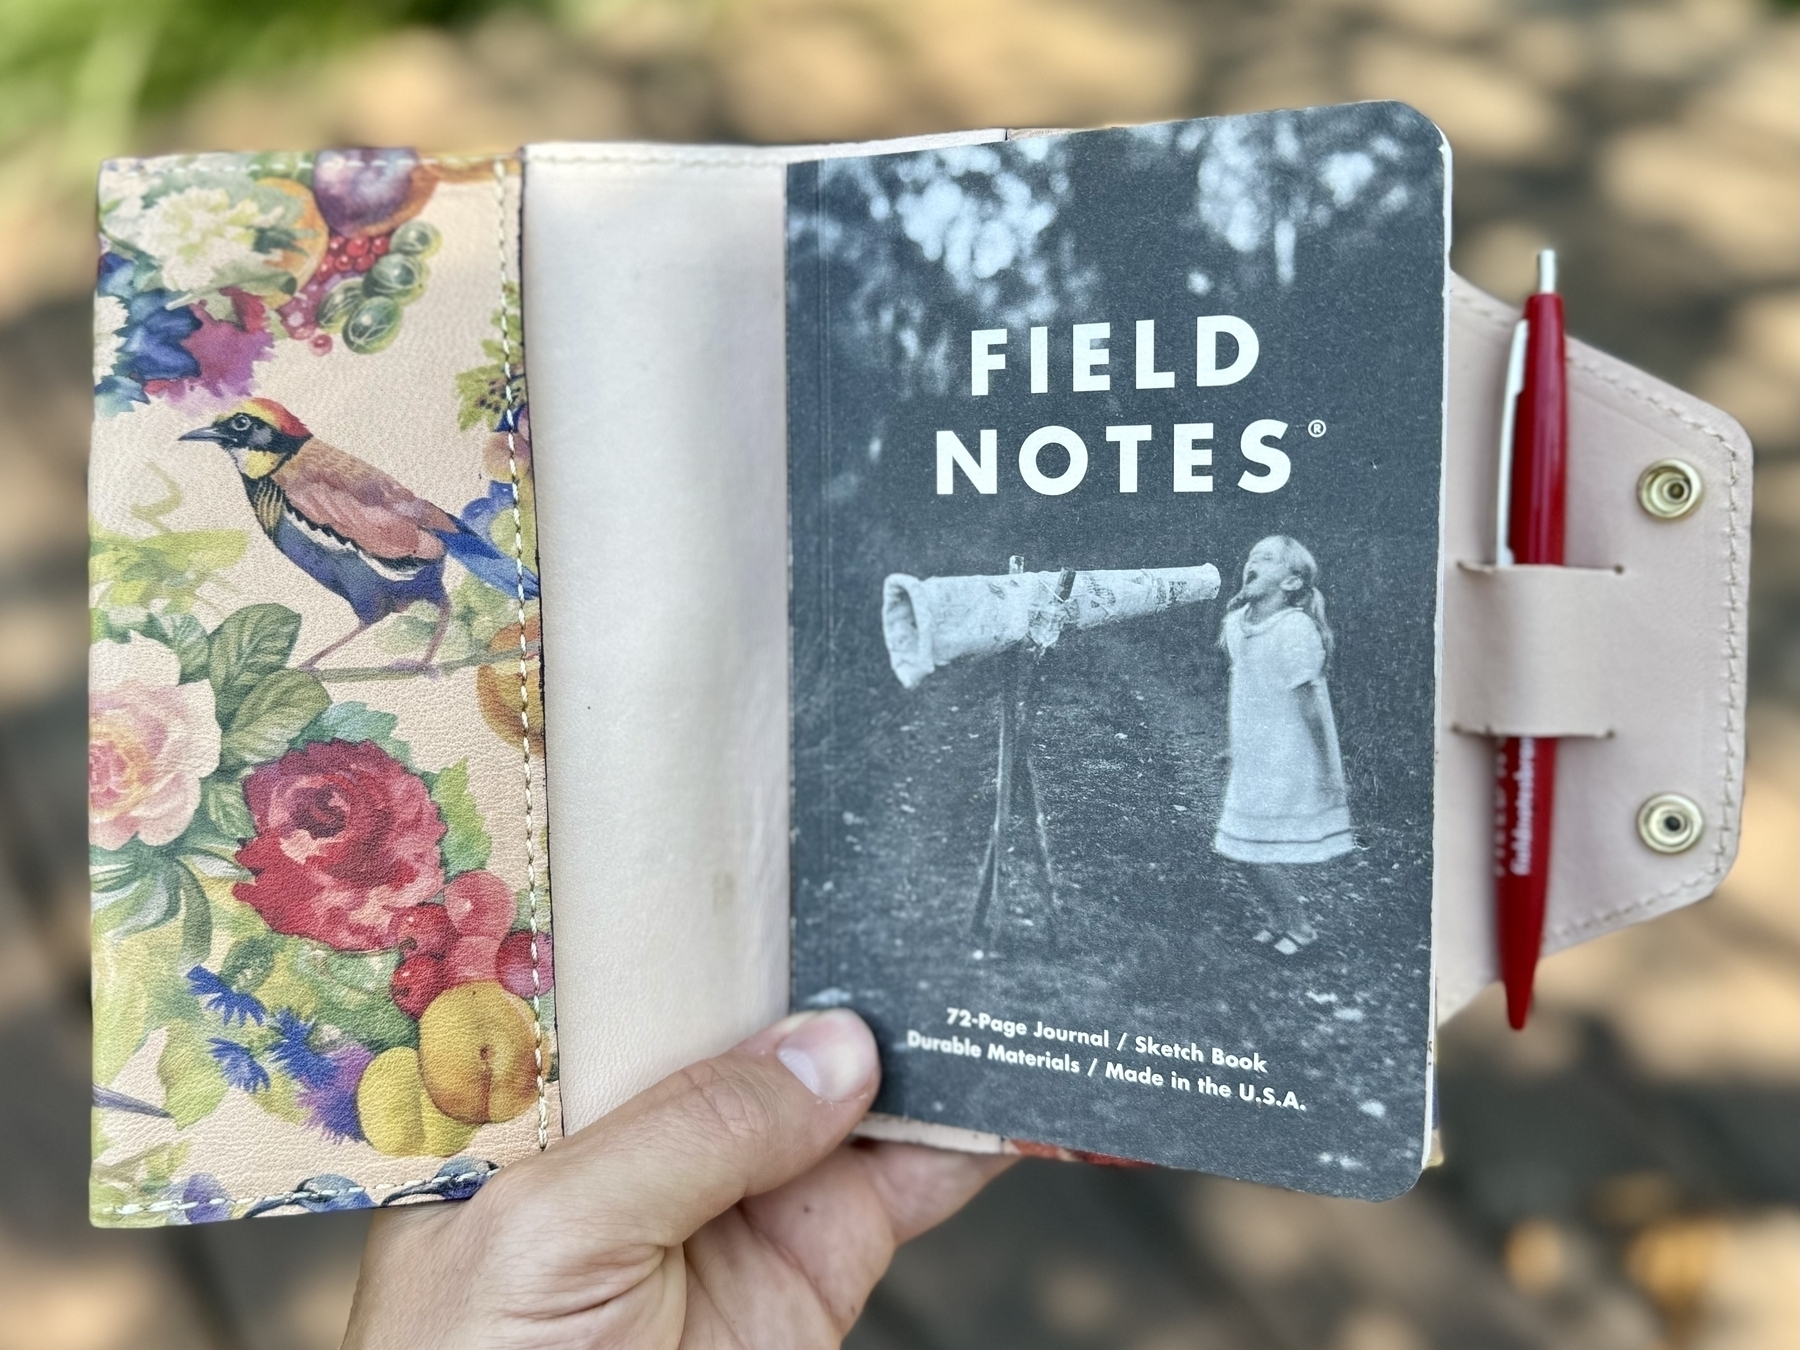 A hand holds an open floral-patterned case containing a small 'Field Notes' notebook and a red pen.